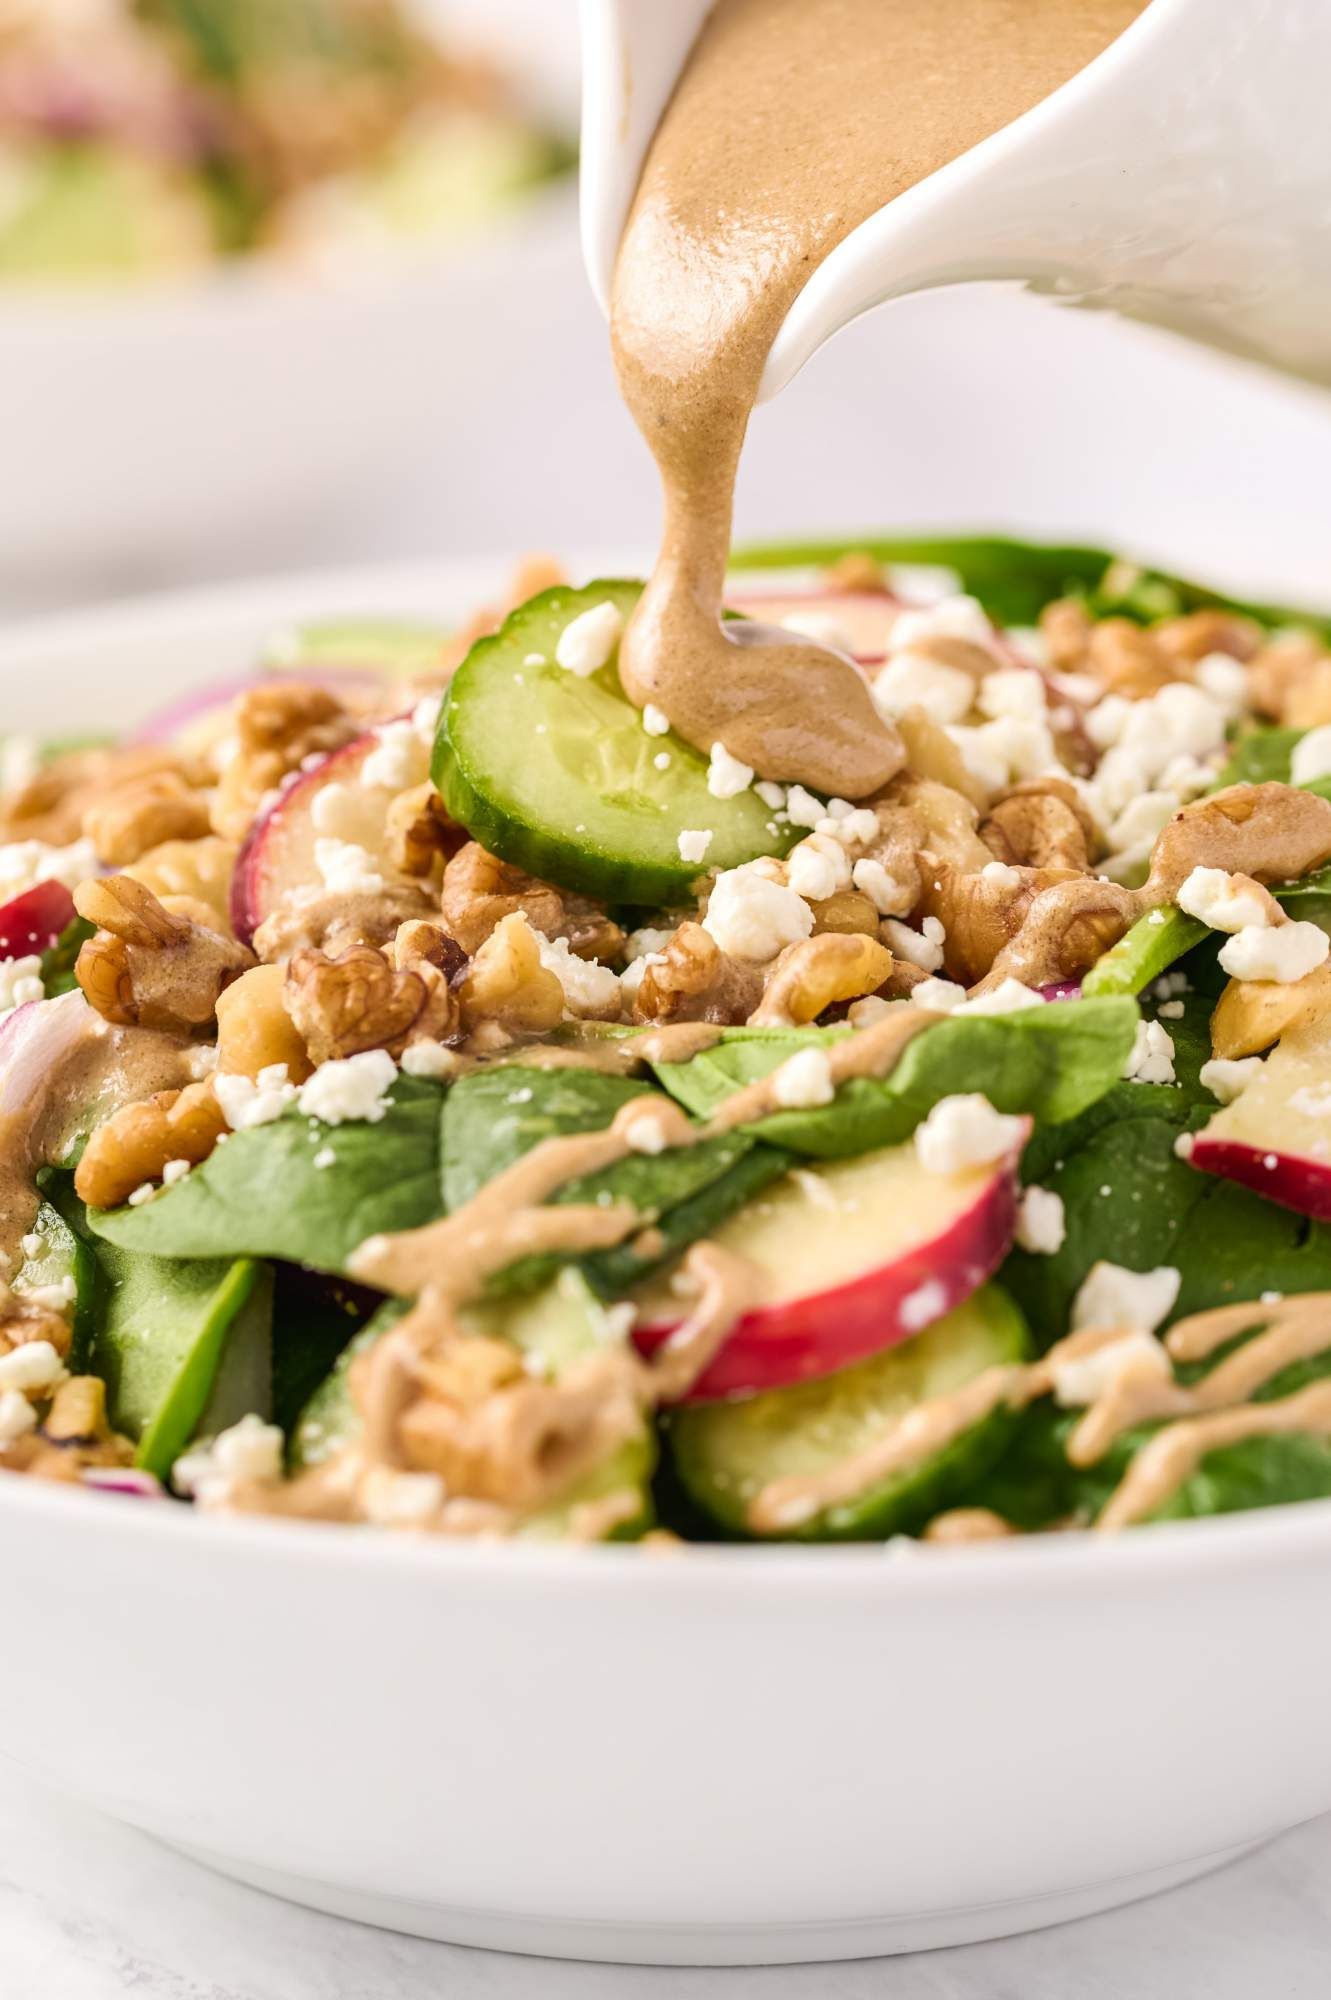 Balsamic vinaigrette being poured over spinach salad with apples, goat cheese, and walnuts.